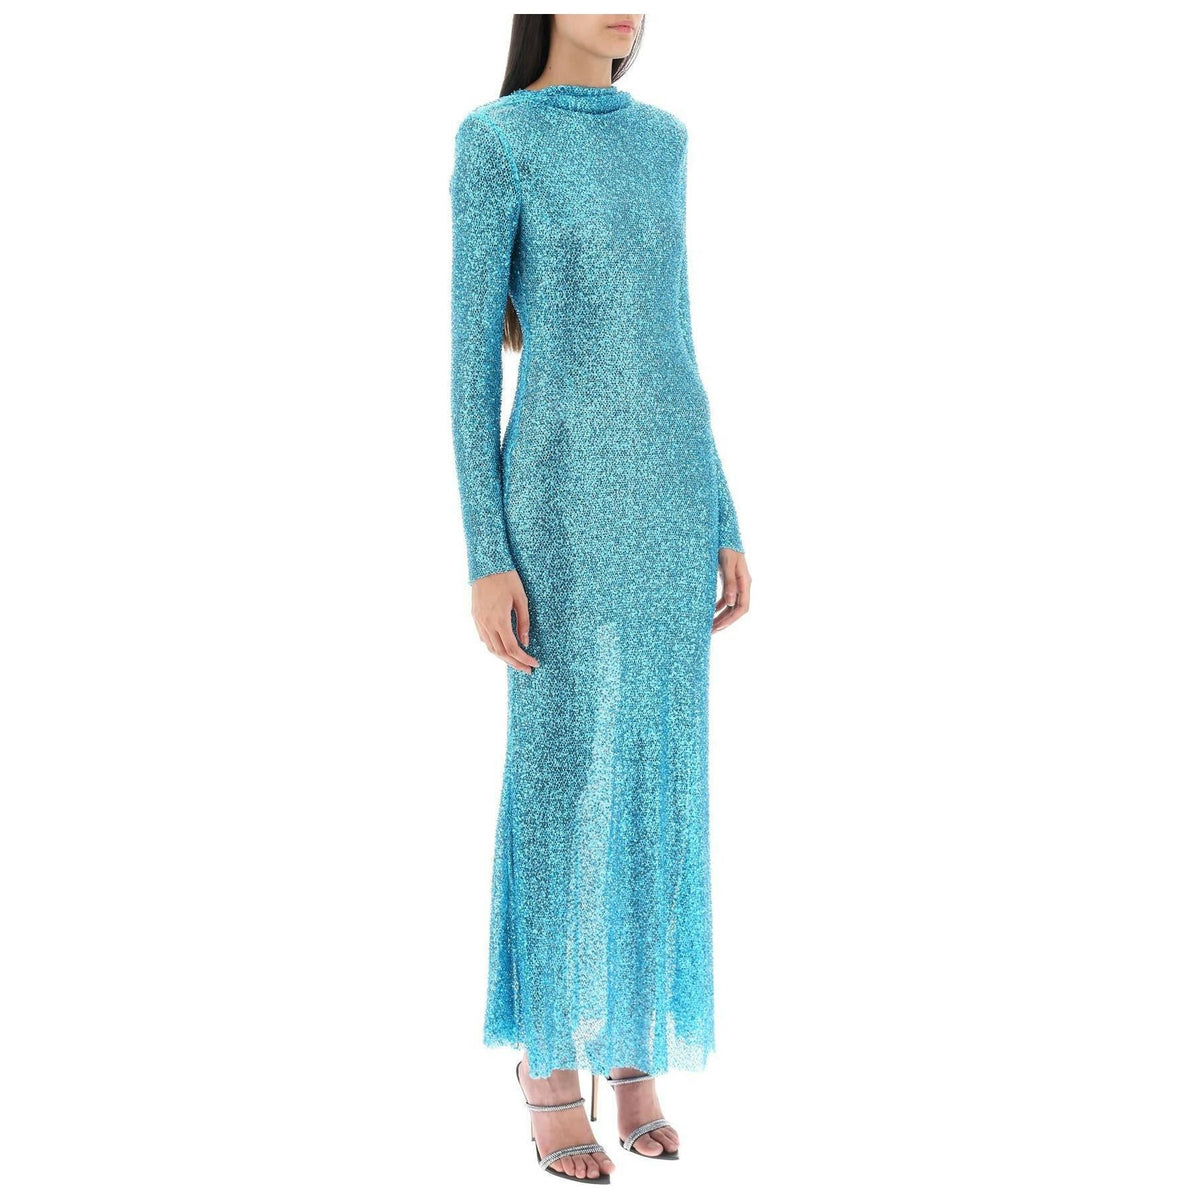 Long Sleeved Maxi Dress With Sequins And Beads SELF PORTRAIT JOHN JULIA.